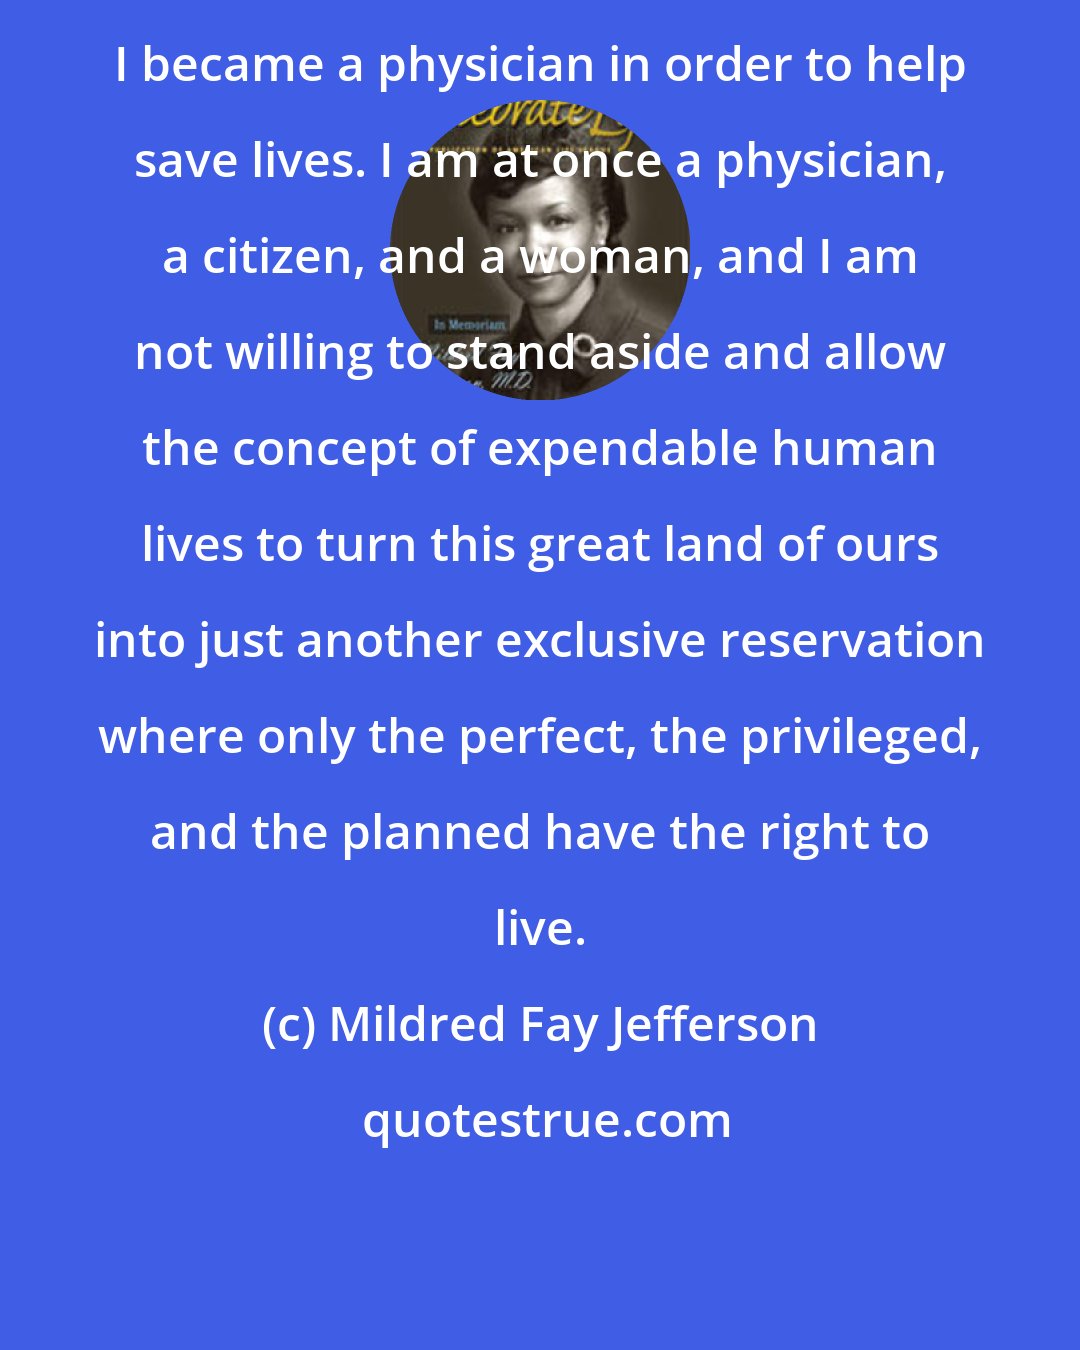 Mildred Fay Jefferson: I became a physician in order to help save lives. I am at once a physician, a citizen, and a woman, and I am not willing to stand aside and allow the concept of expendable human lives to turn this great land of ours into just another exclusive reservation where only the perfect, the privileged, and the planned have the right to live.